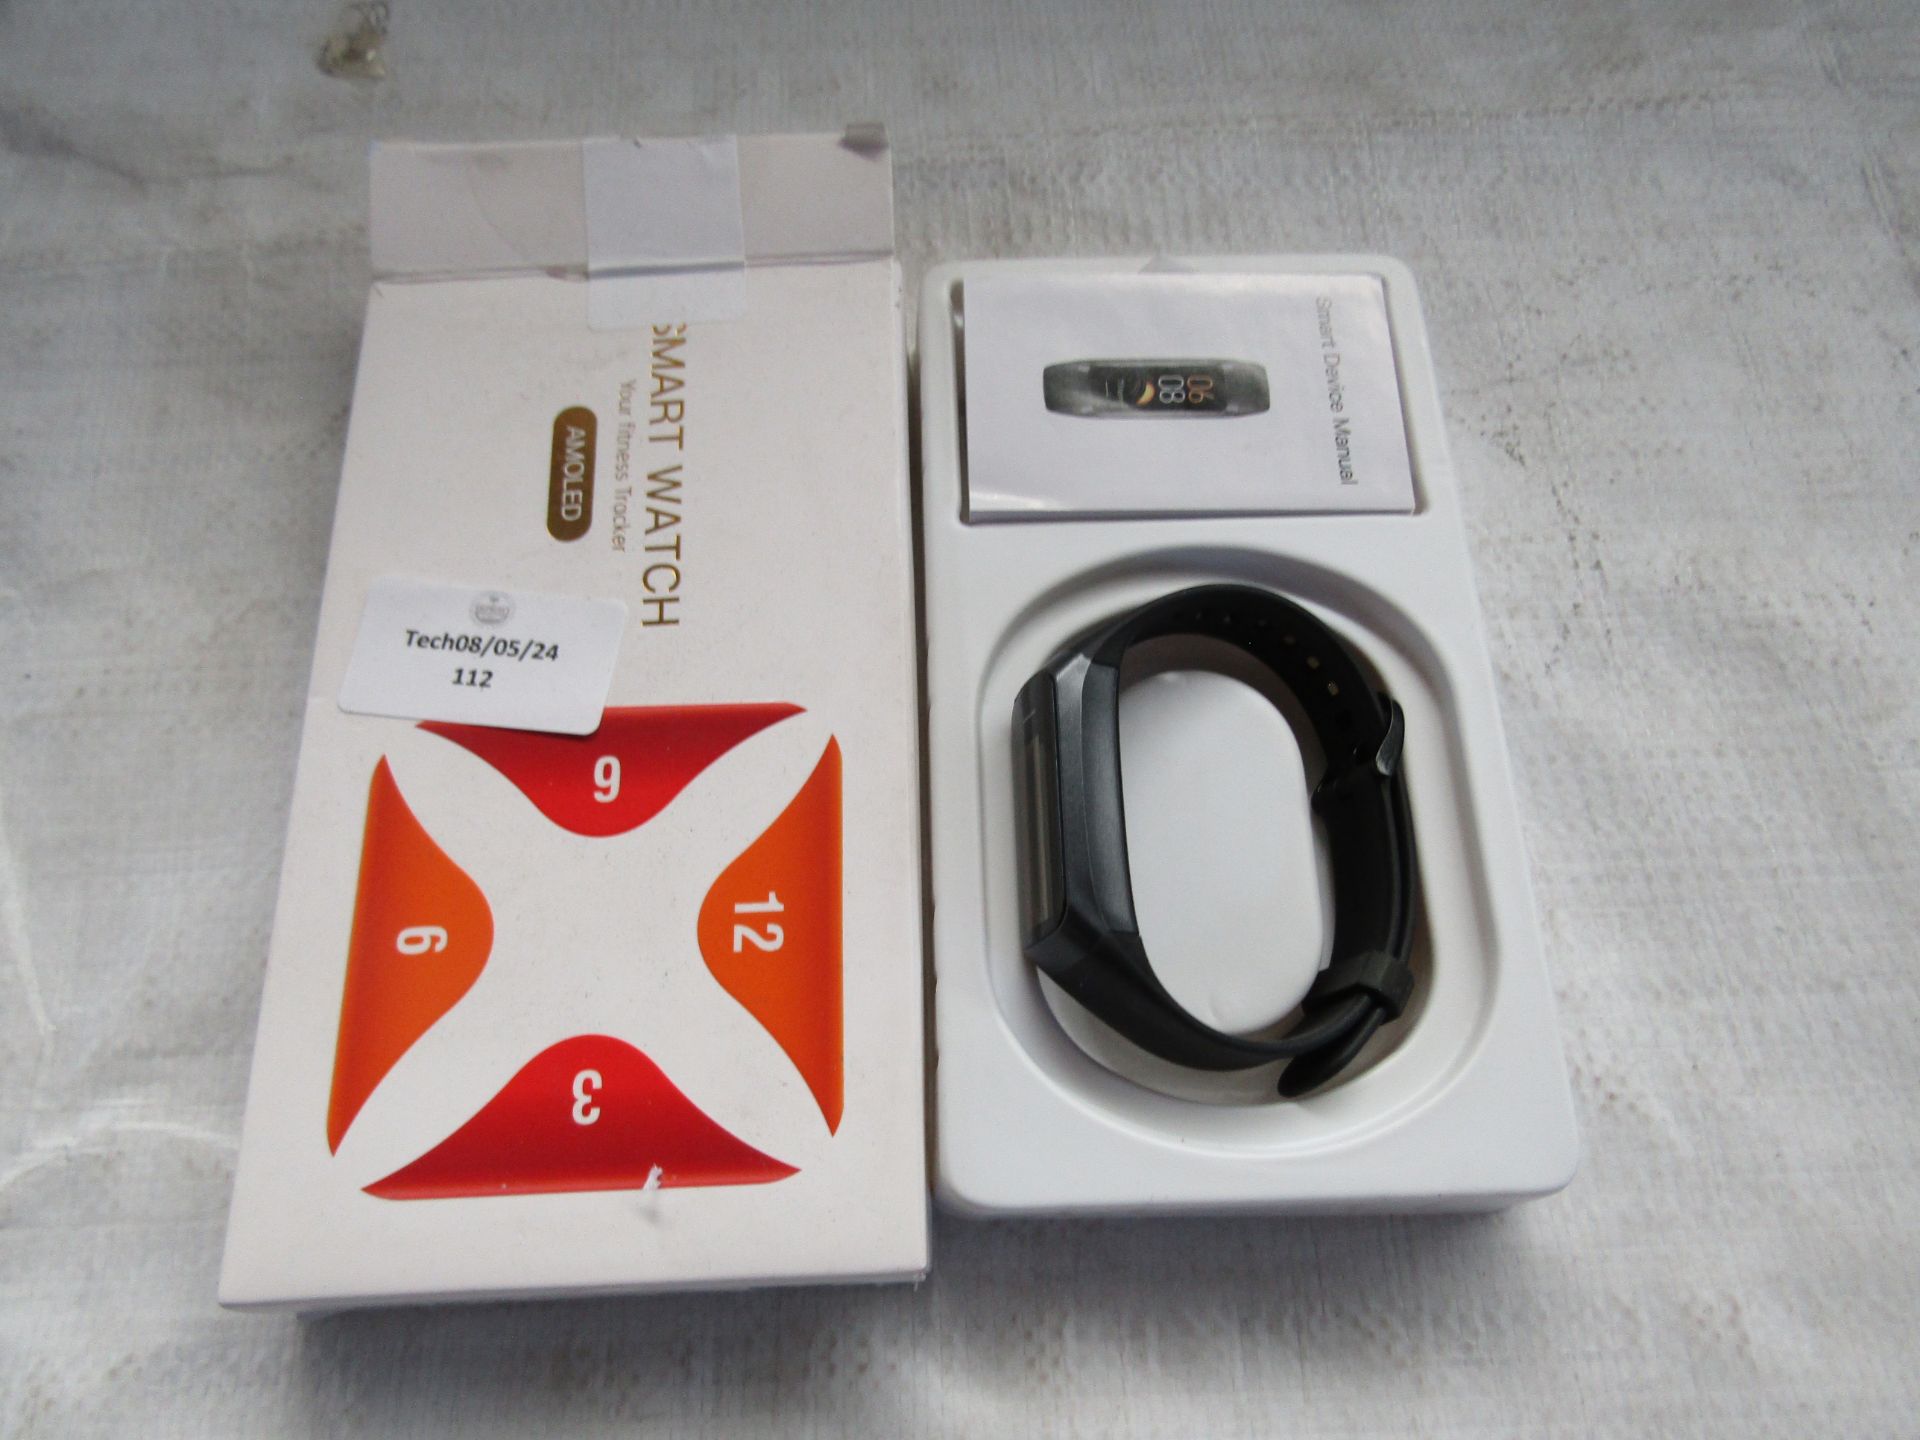 Smart Watch & Fitness Tracker, Unchecked & Boxed. RRP £10-15